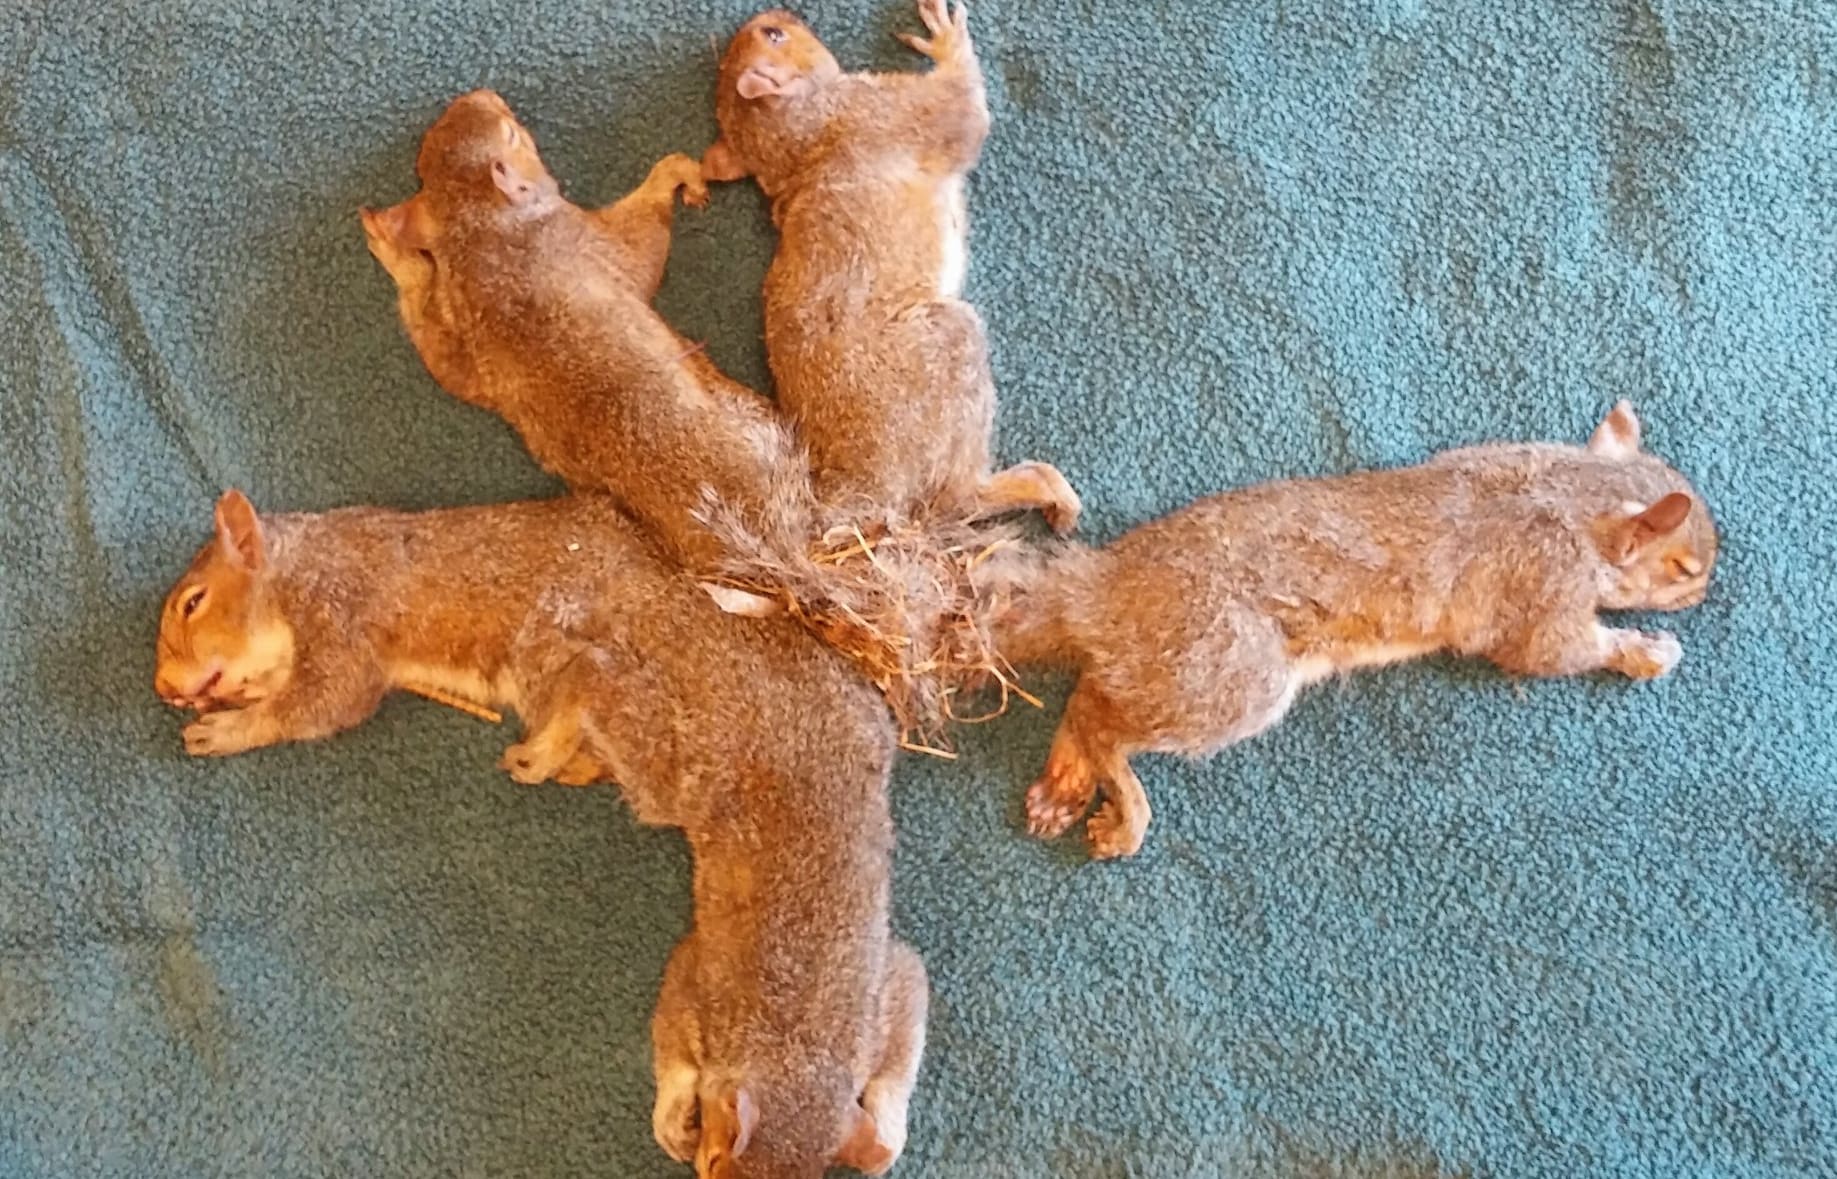 The five juvenile squirrels had to be anaesthetised before their tails could be separated.